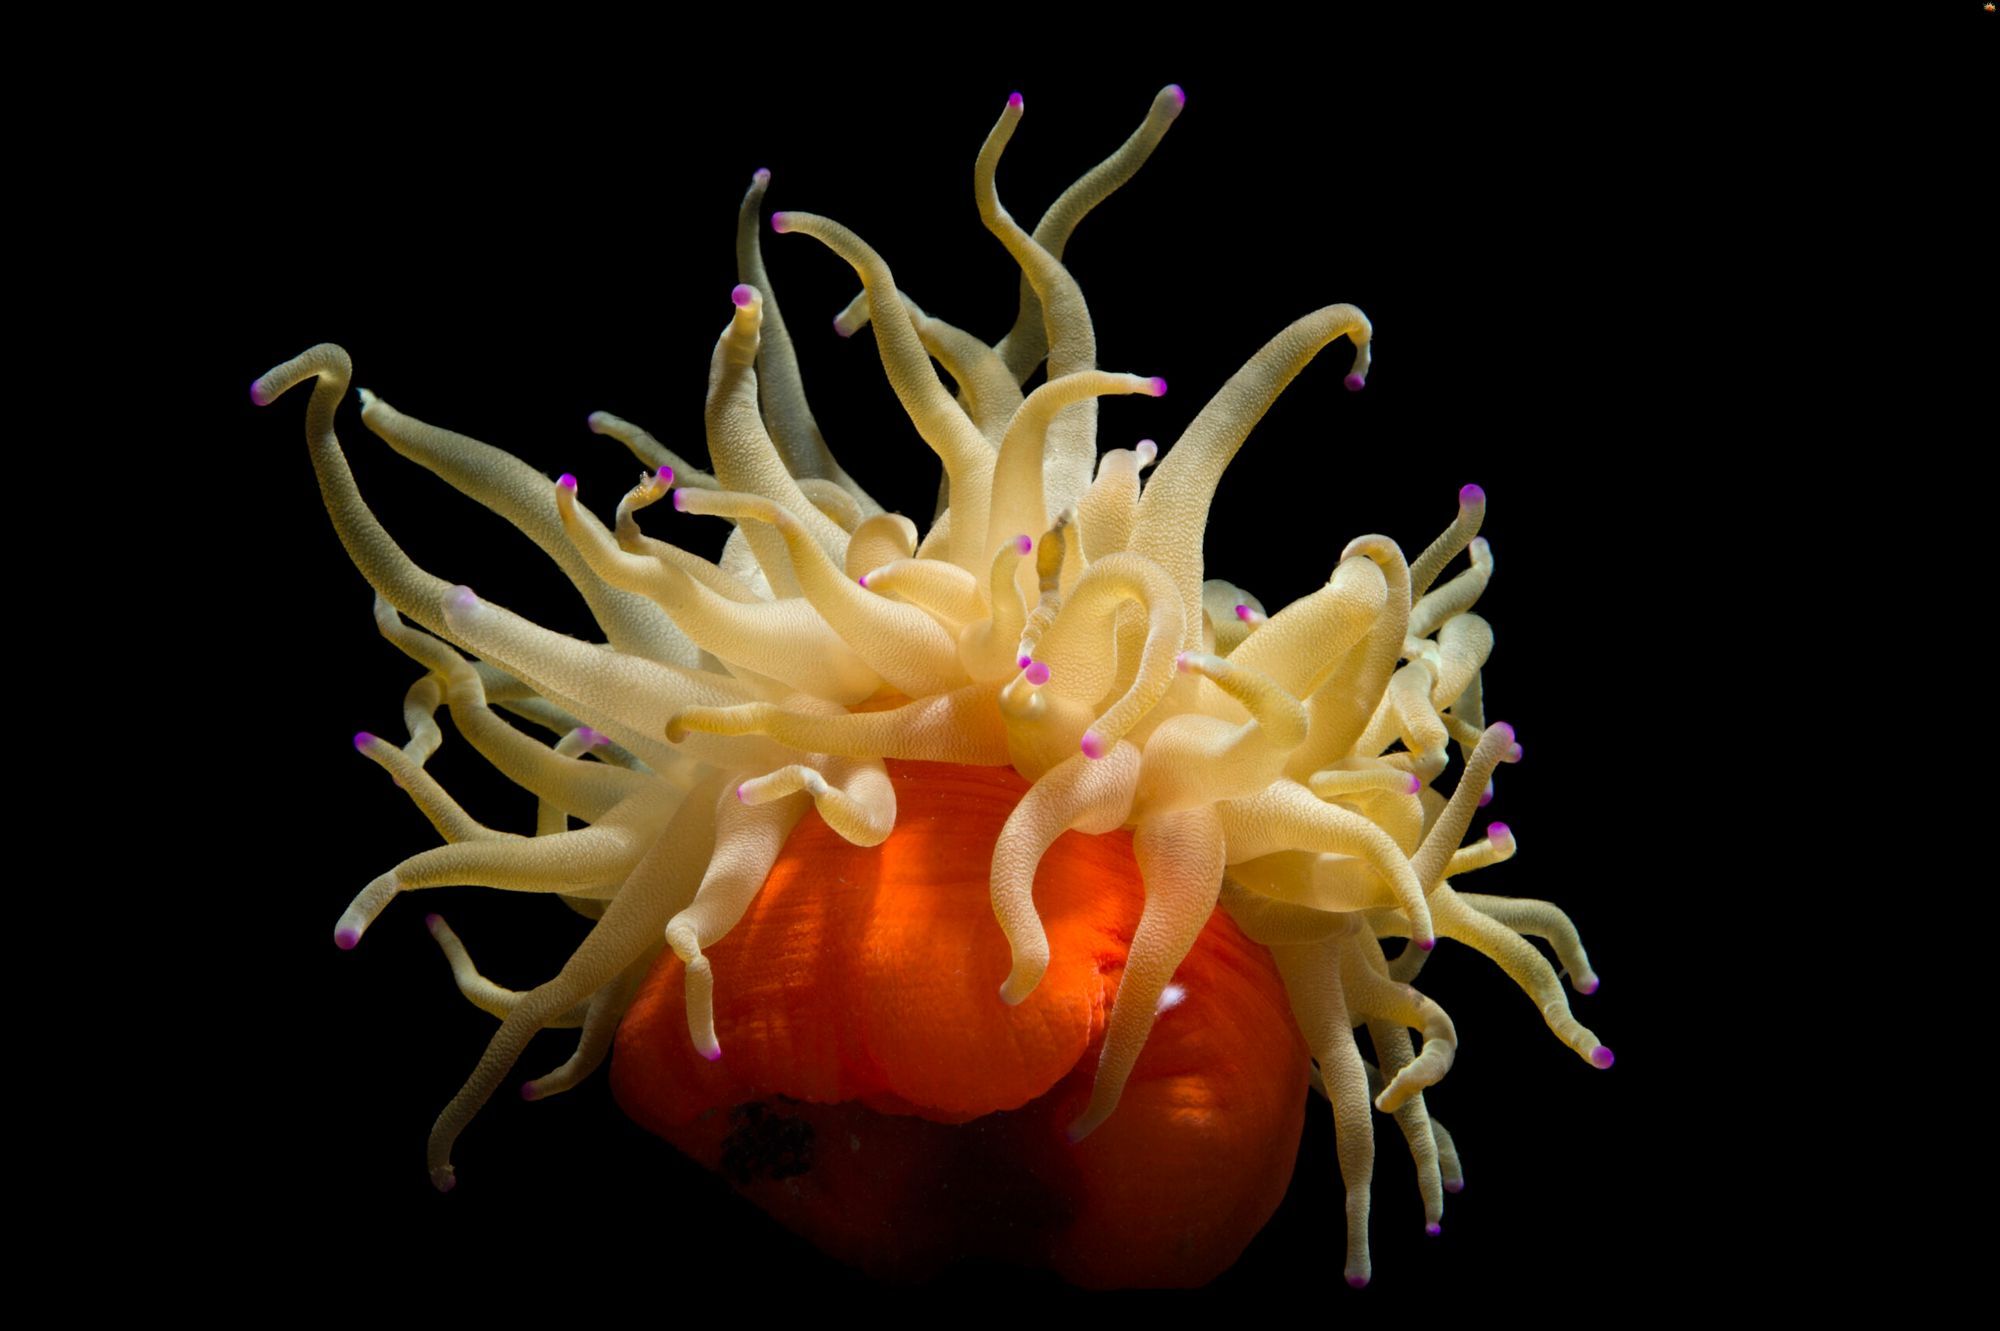 13-facts-about-phylum-cnidaria